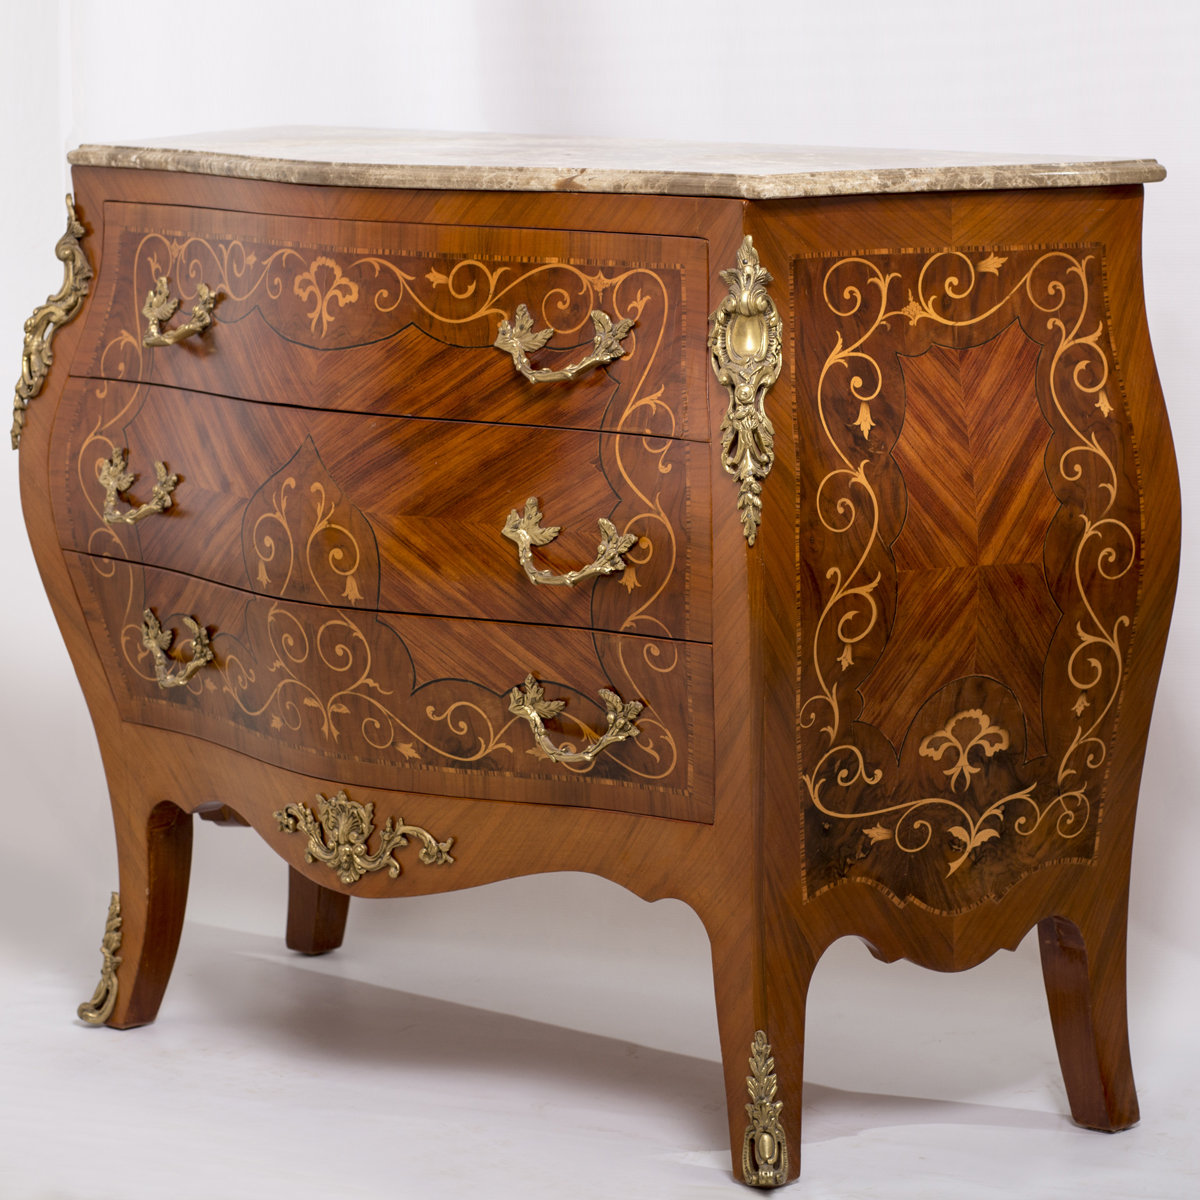 L.XV CHEST-OF-DRAWERS IN THE STYLE OF B.V.R.B : Chests of drawers -  Collection